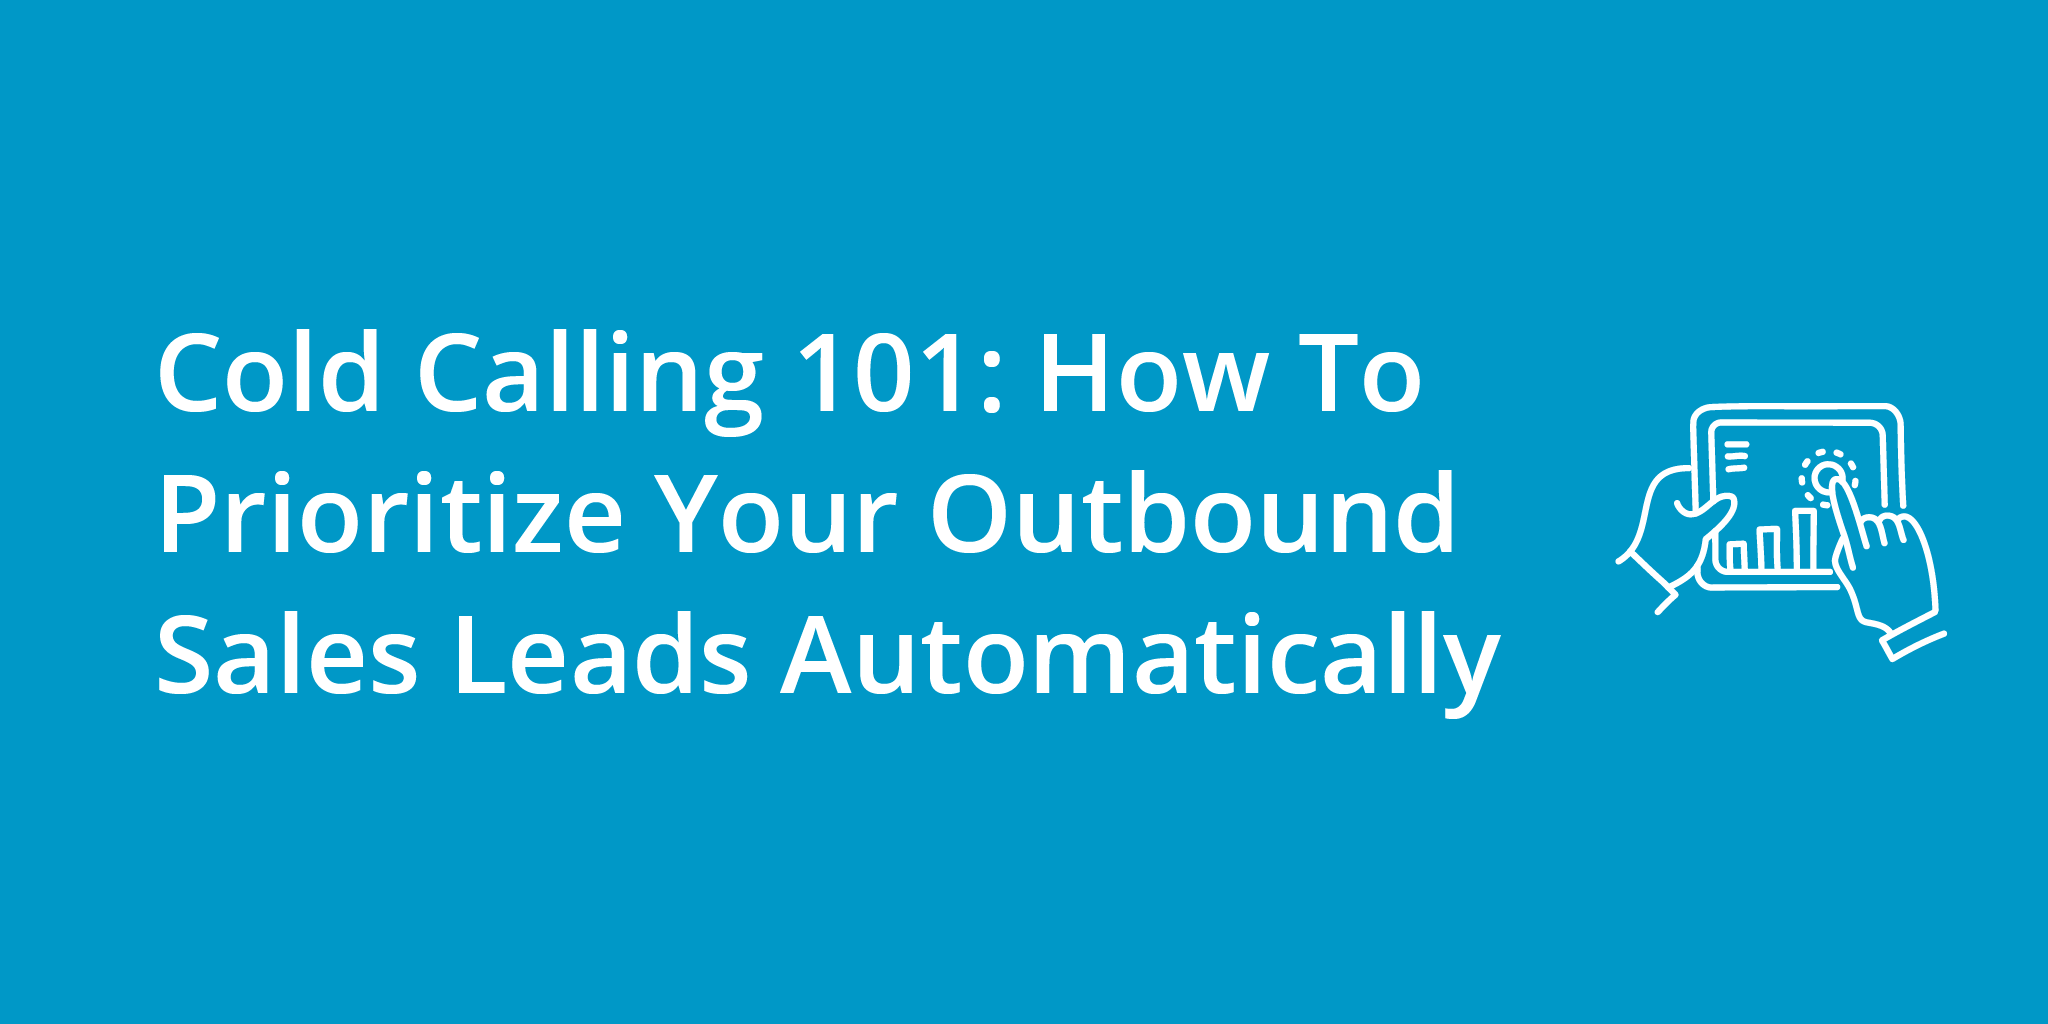 Cold Calling 101: How To Prioritize Your Outbound Sales Leads (Automatically) | Telephones for business